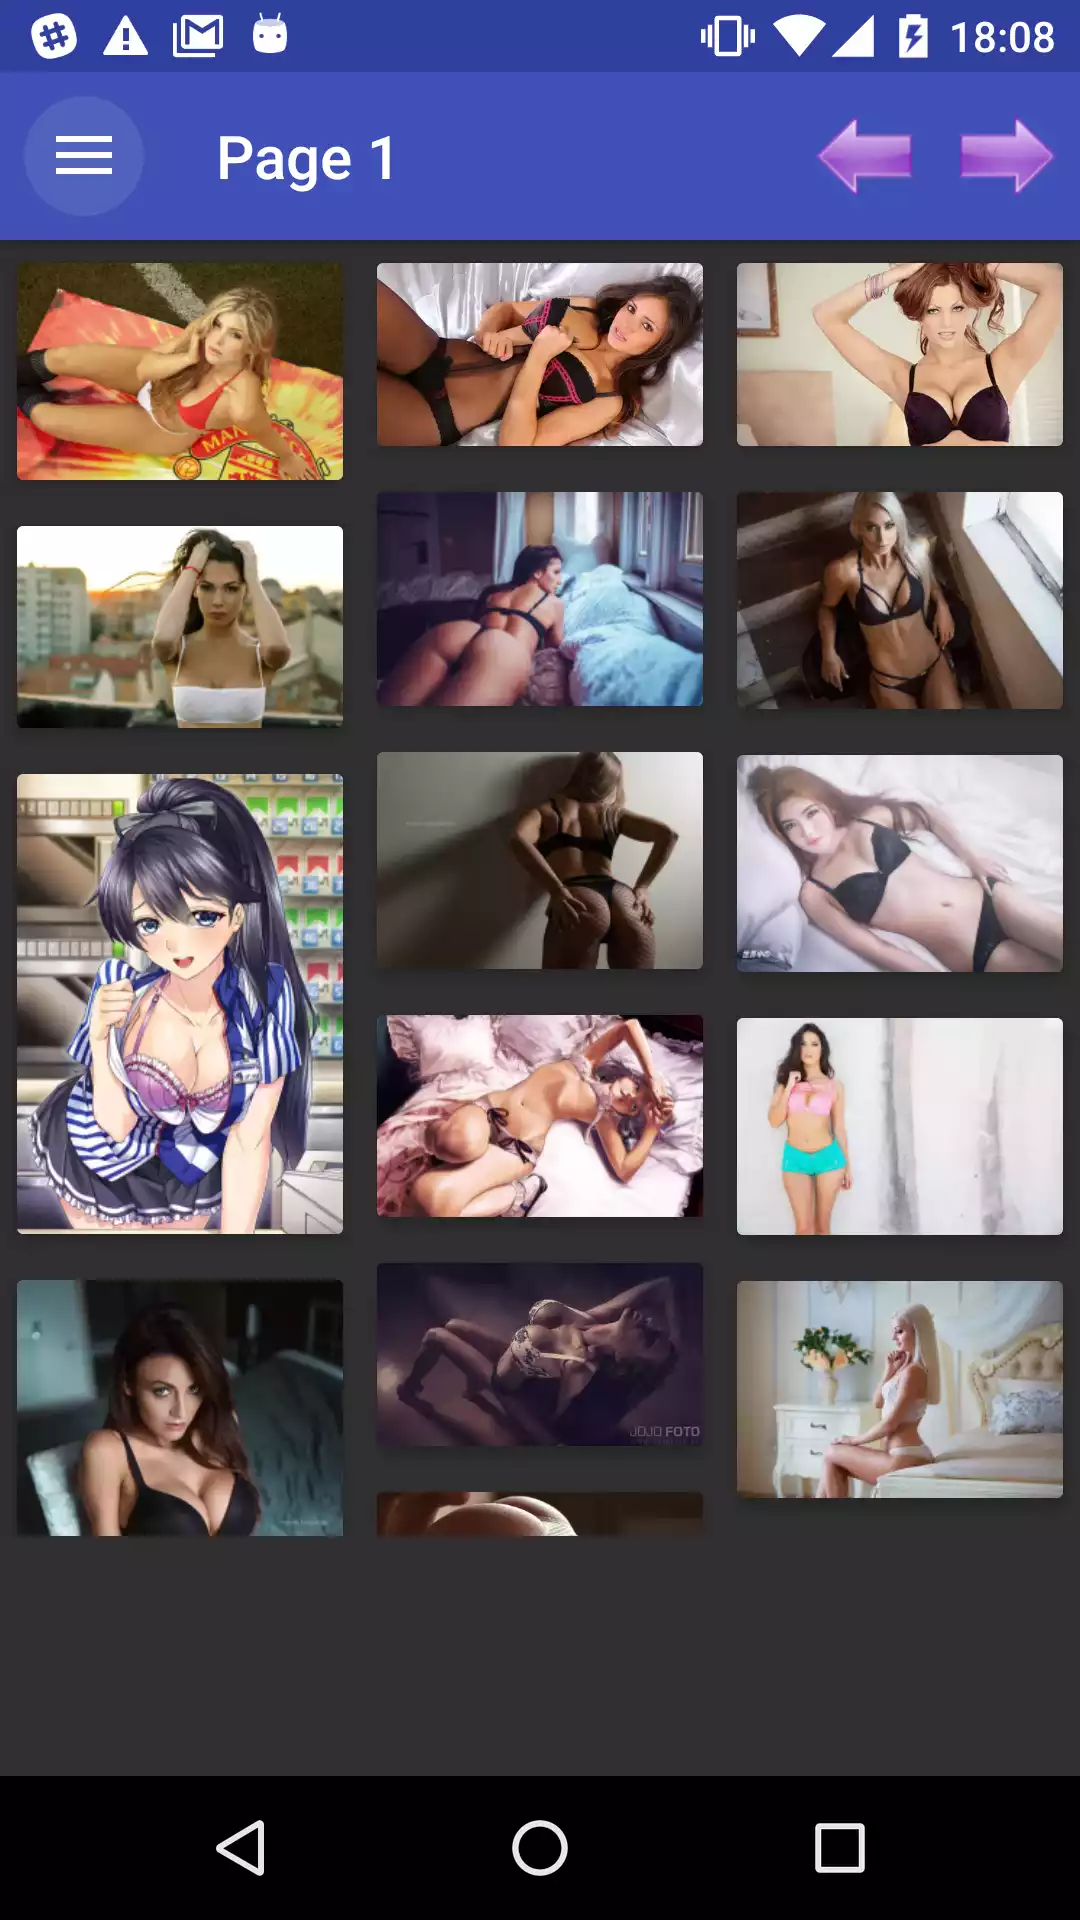 Bra Wallpapers pornstar,new,pictures,hentai,porn,backgrounds,android,apk,wallpaper,photos,app,manga,free,sexy,wallpapers,download,pics,apps,hot